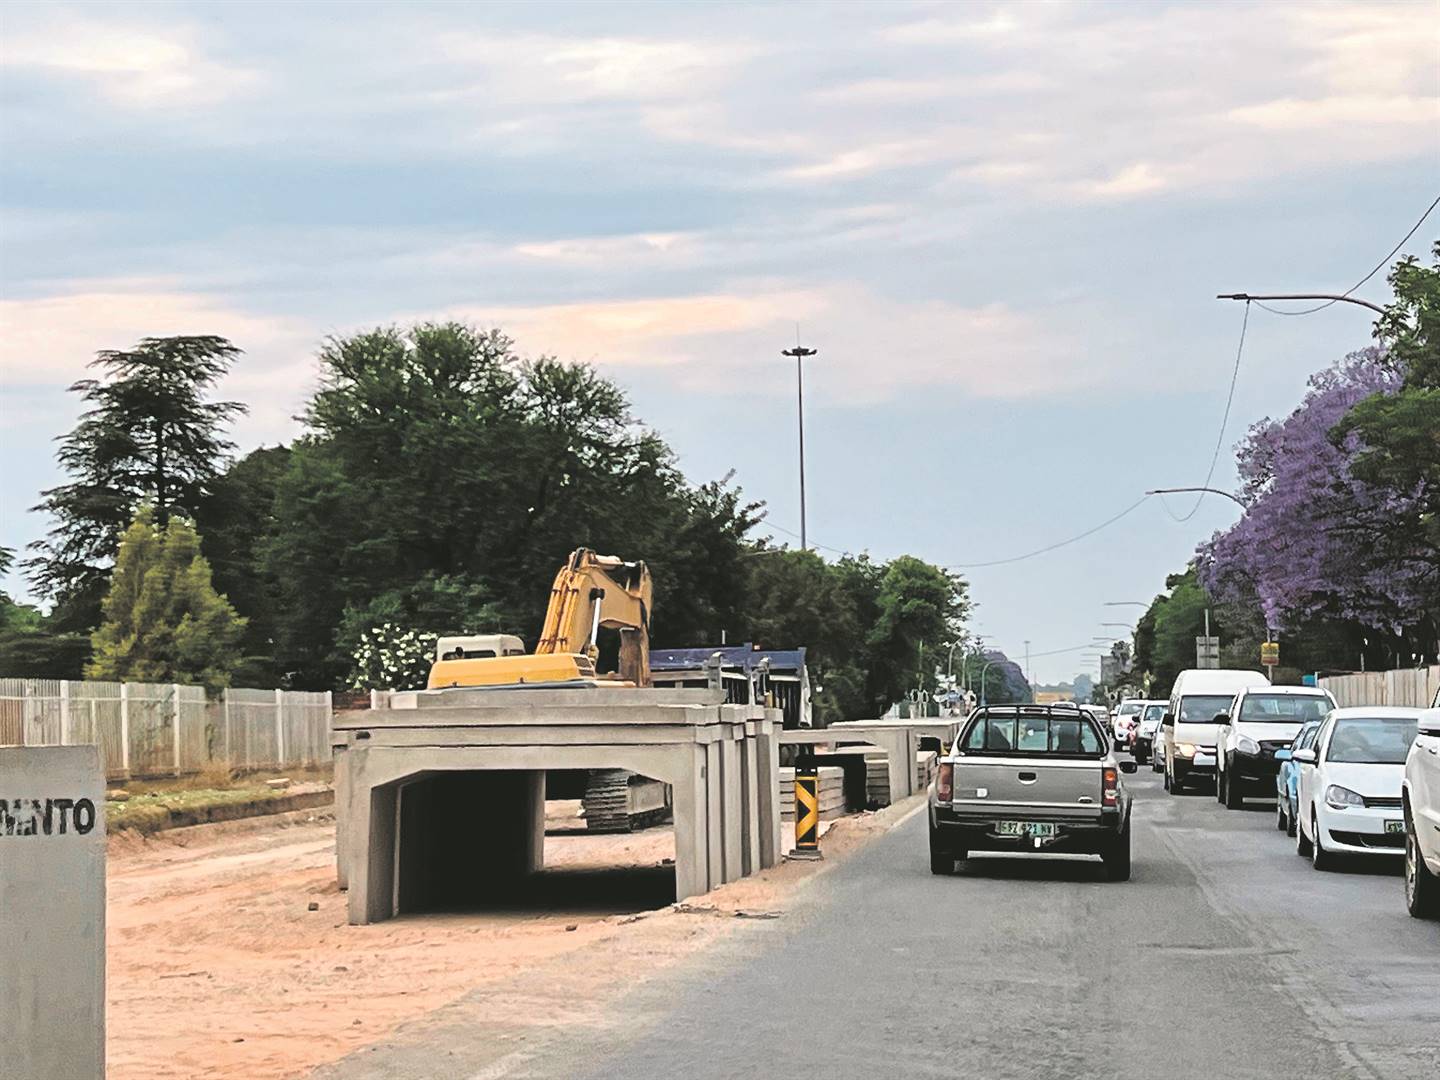  The decision of the North West department of public works and roads to award a R50 million tender for the refurbishment and maintenance of Nelson Mandela Drive in Mahikeng has turned into a nightmare Photos: Tebogo Letsie